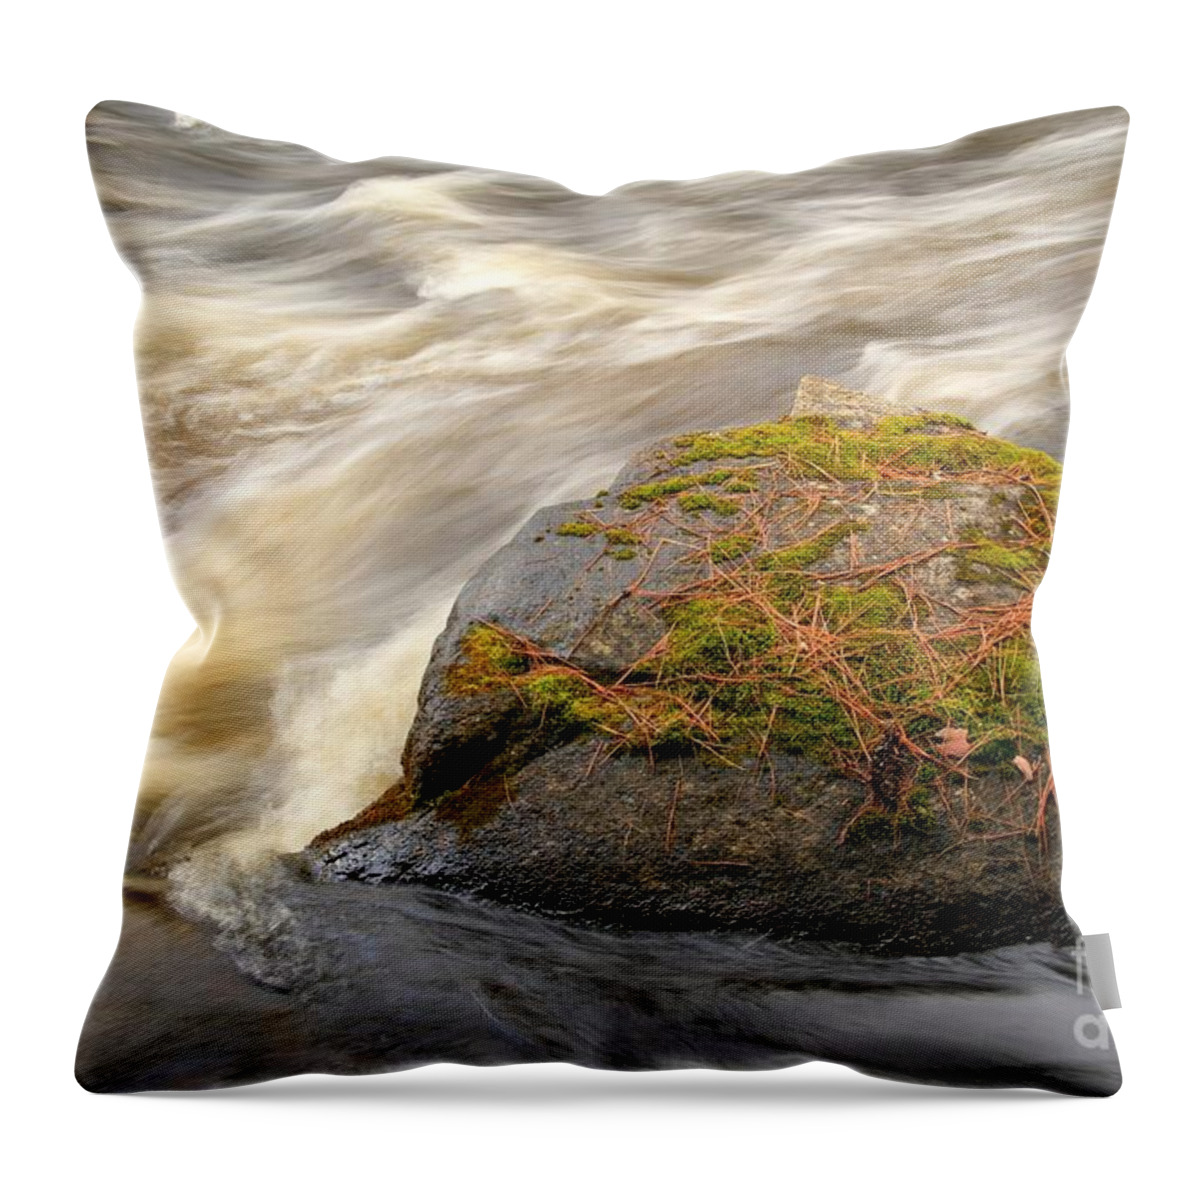 Waterfalls Throw Pillow featuring the photograph Dave's Falls #7442 by Mark J Seefeldt